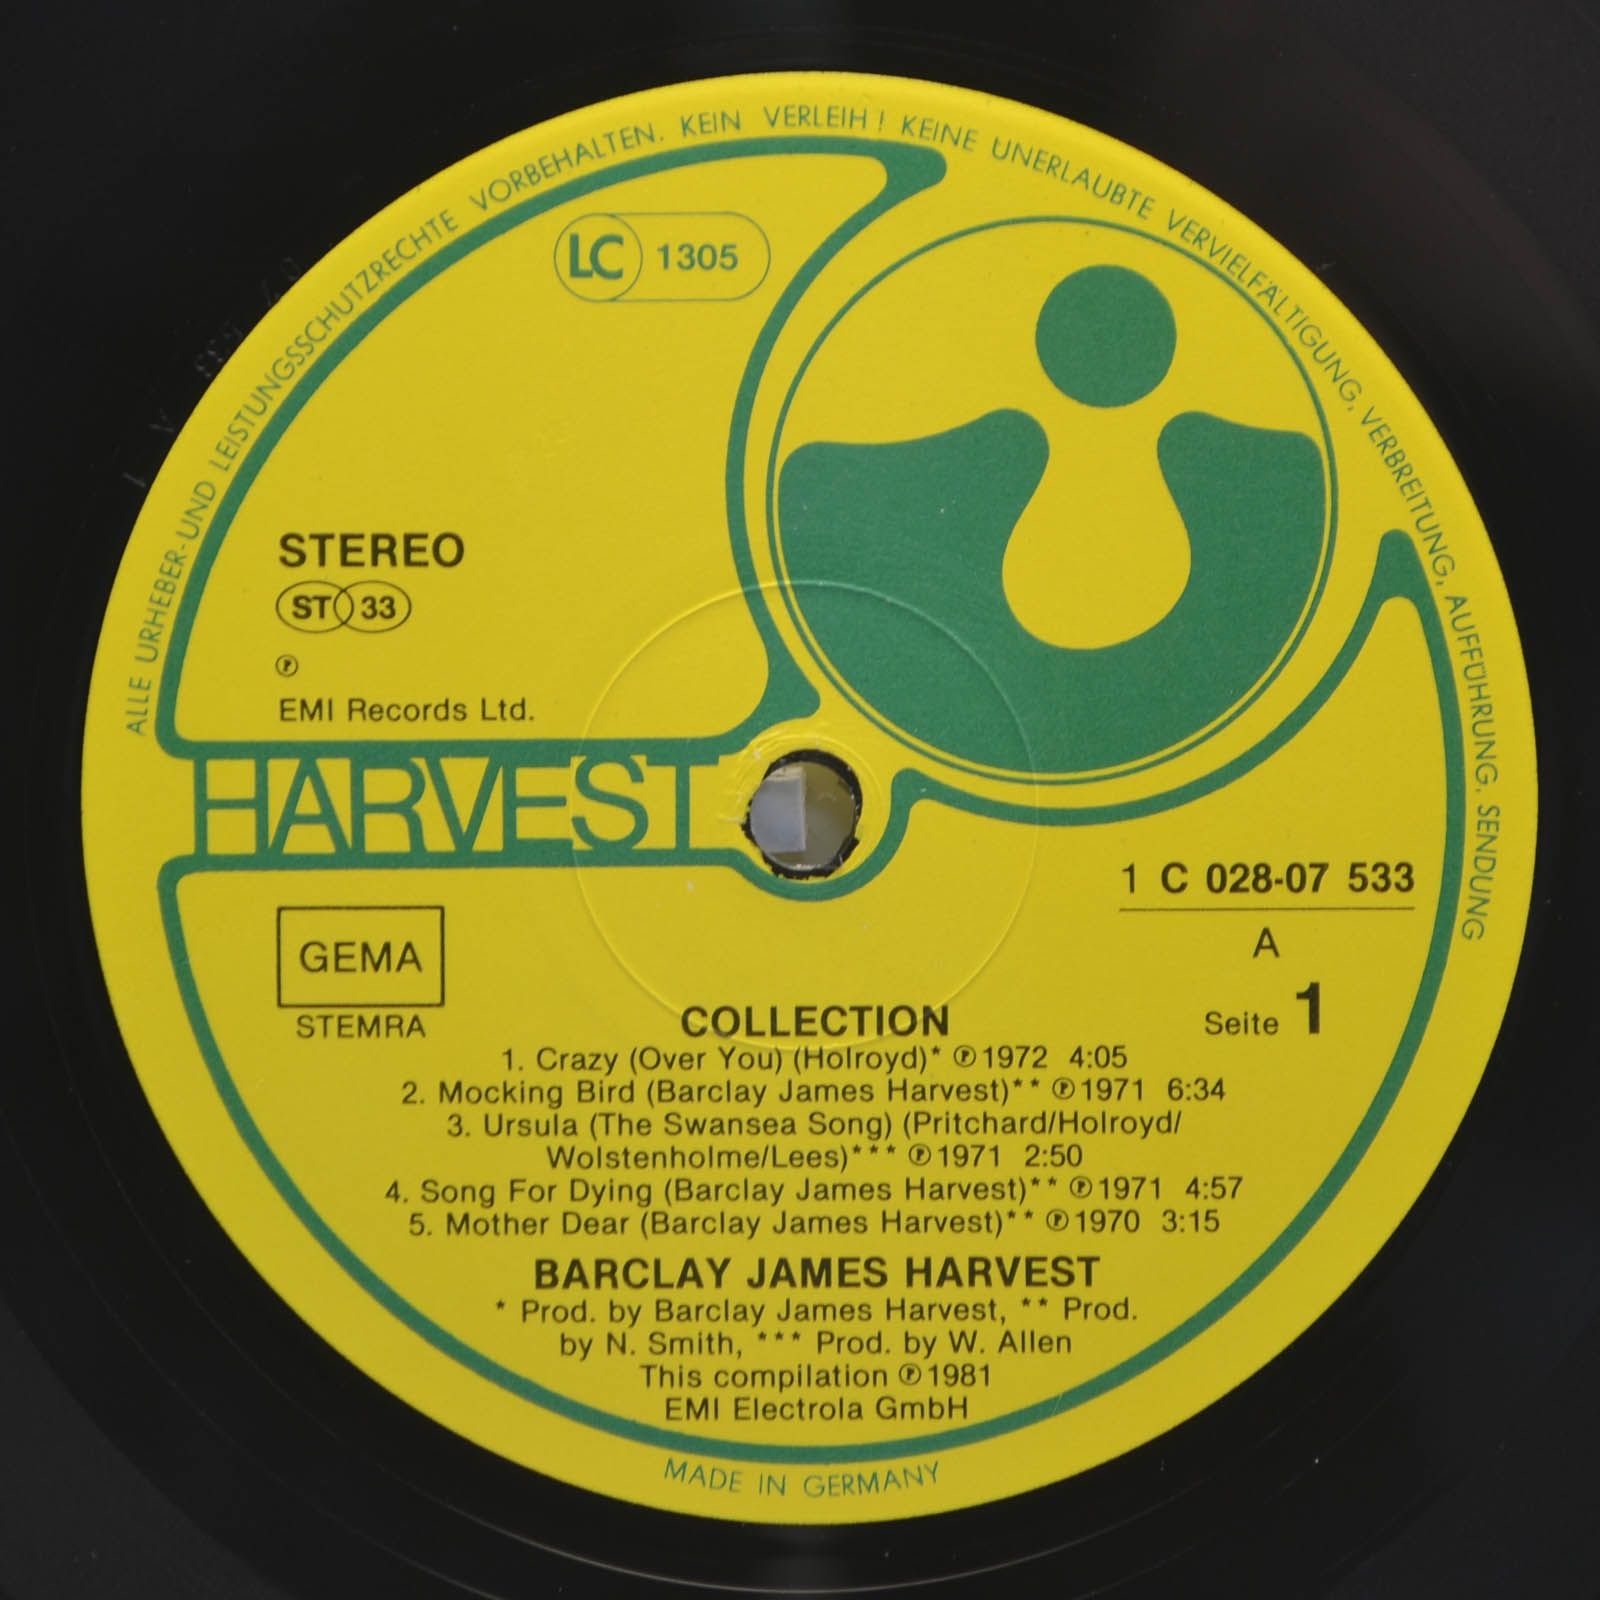 Barclay James Harvest — Collection, 1981